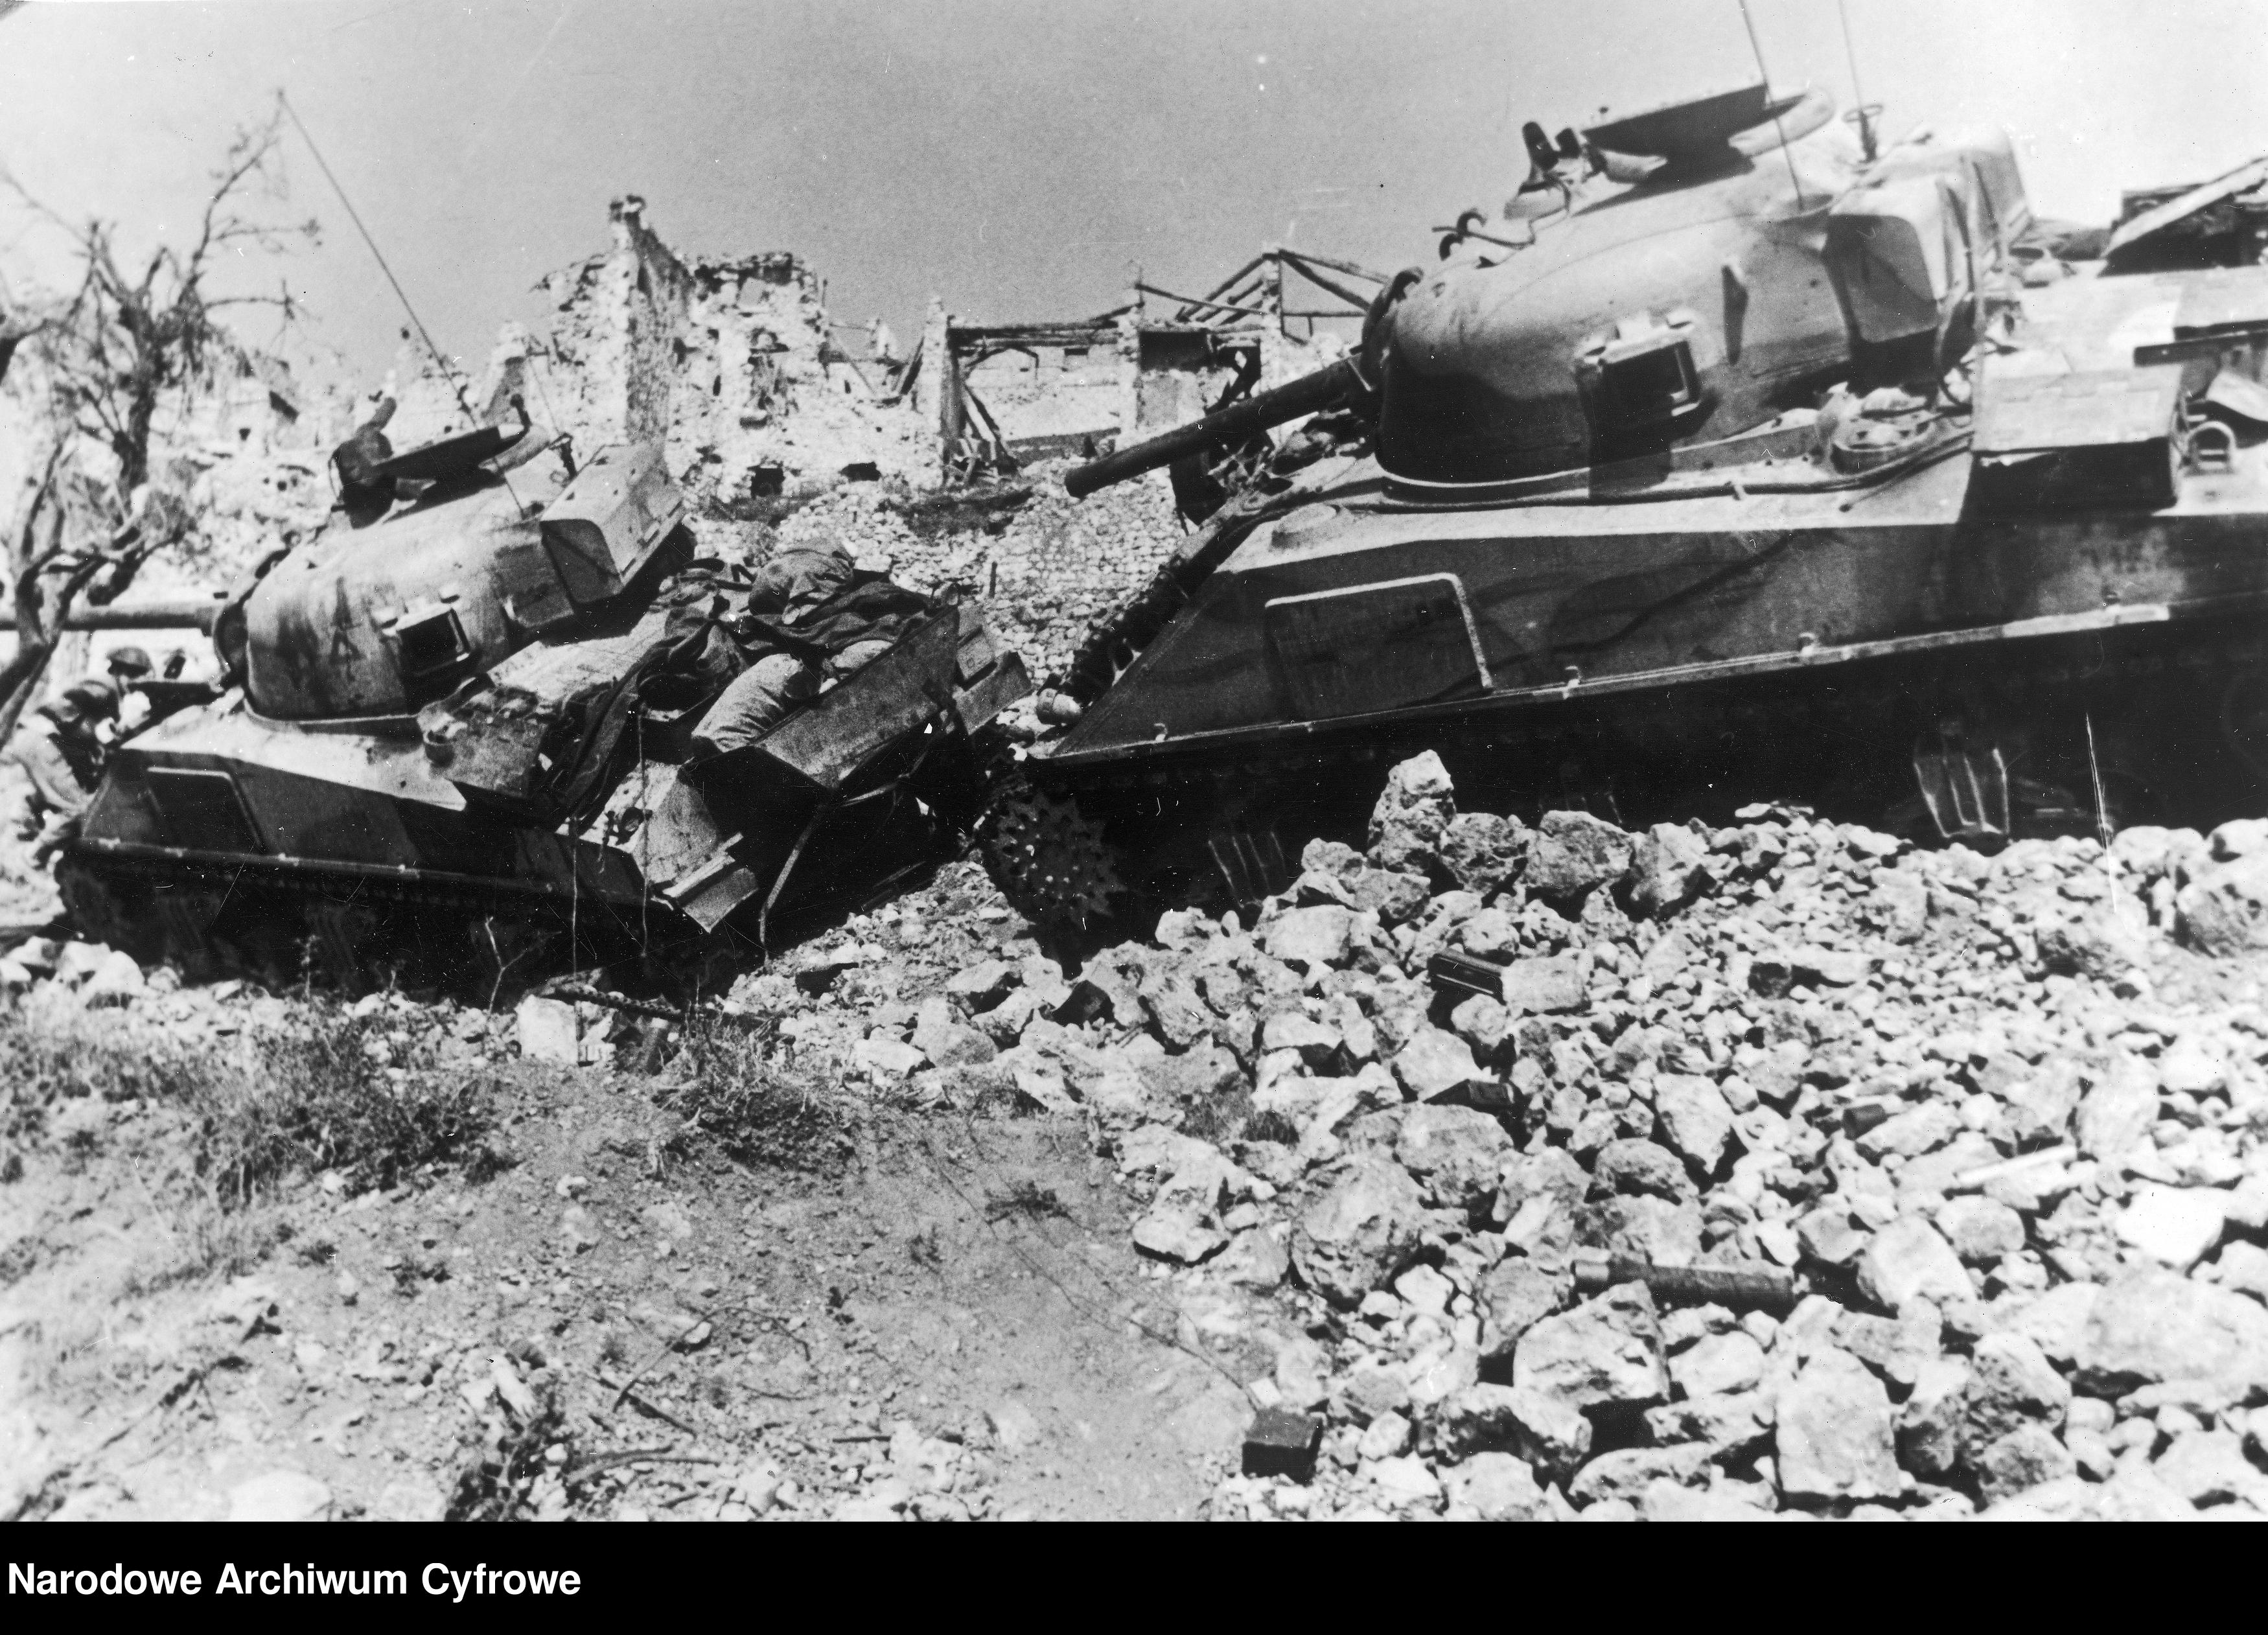 <p class='eng'>1944/05/24 - 1944/05/25<br />M4 Sherman "Magnat" and "Morus" tanks belonging to Capt. Kuczuk - Pilecki and Lieutenant Tymieniecki from the 6th Armored Regiment "Children of Lviv", suspended on rocky terraces. Ruins of the village in the background.<br />NAC 3/24/0/-/460/1</p>